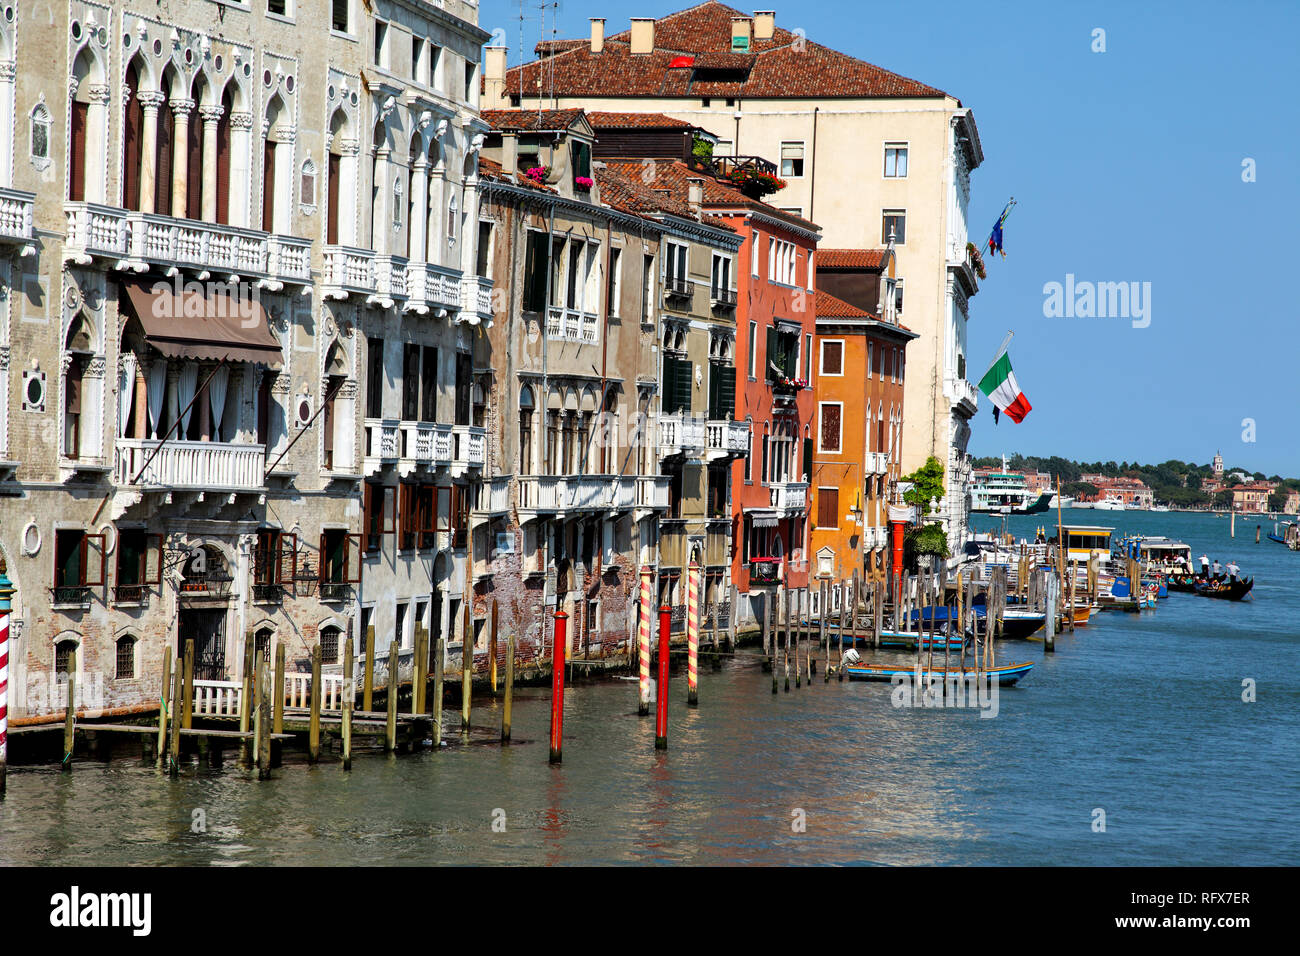 View of the Grand Canal from Ponte dell'Accademia in Venice. Stock Photo